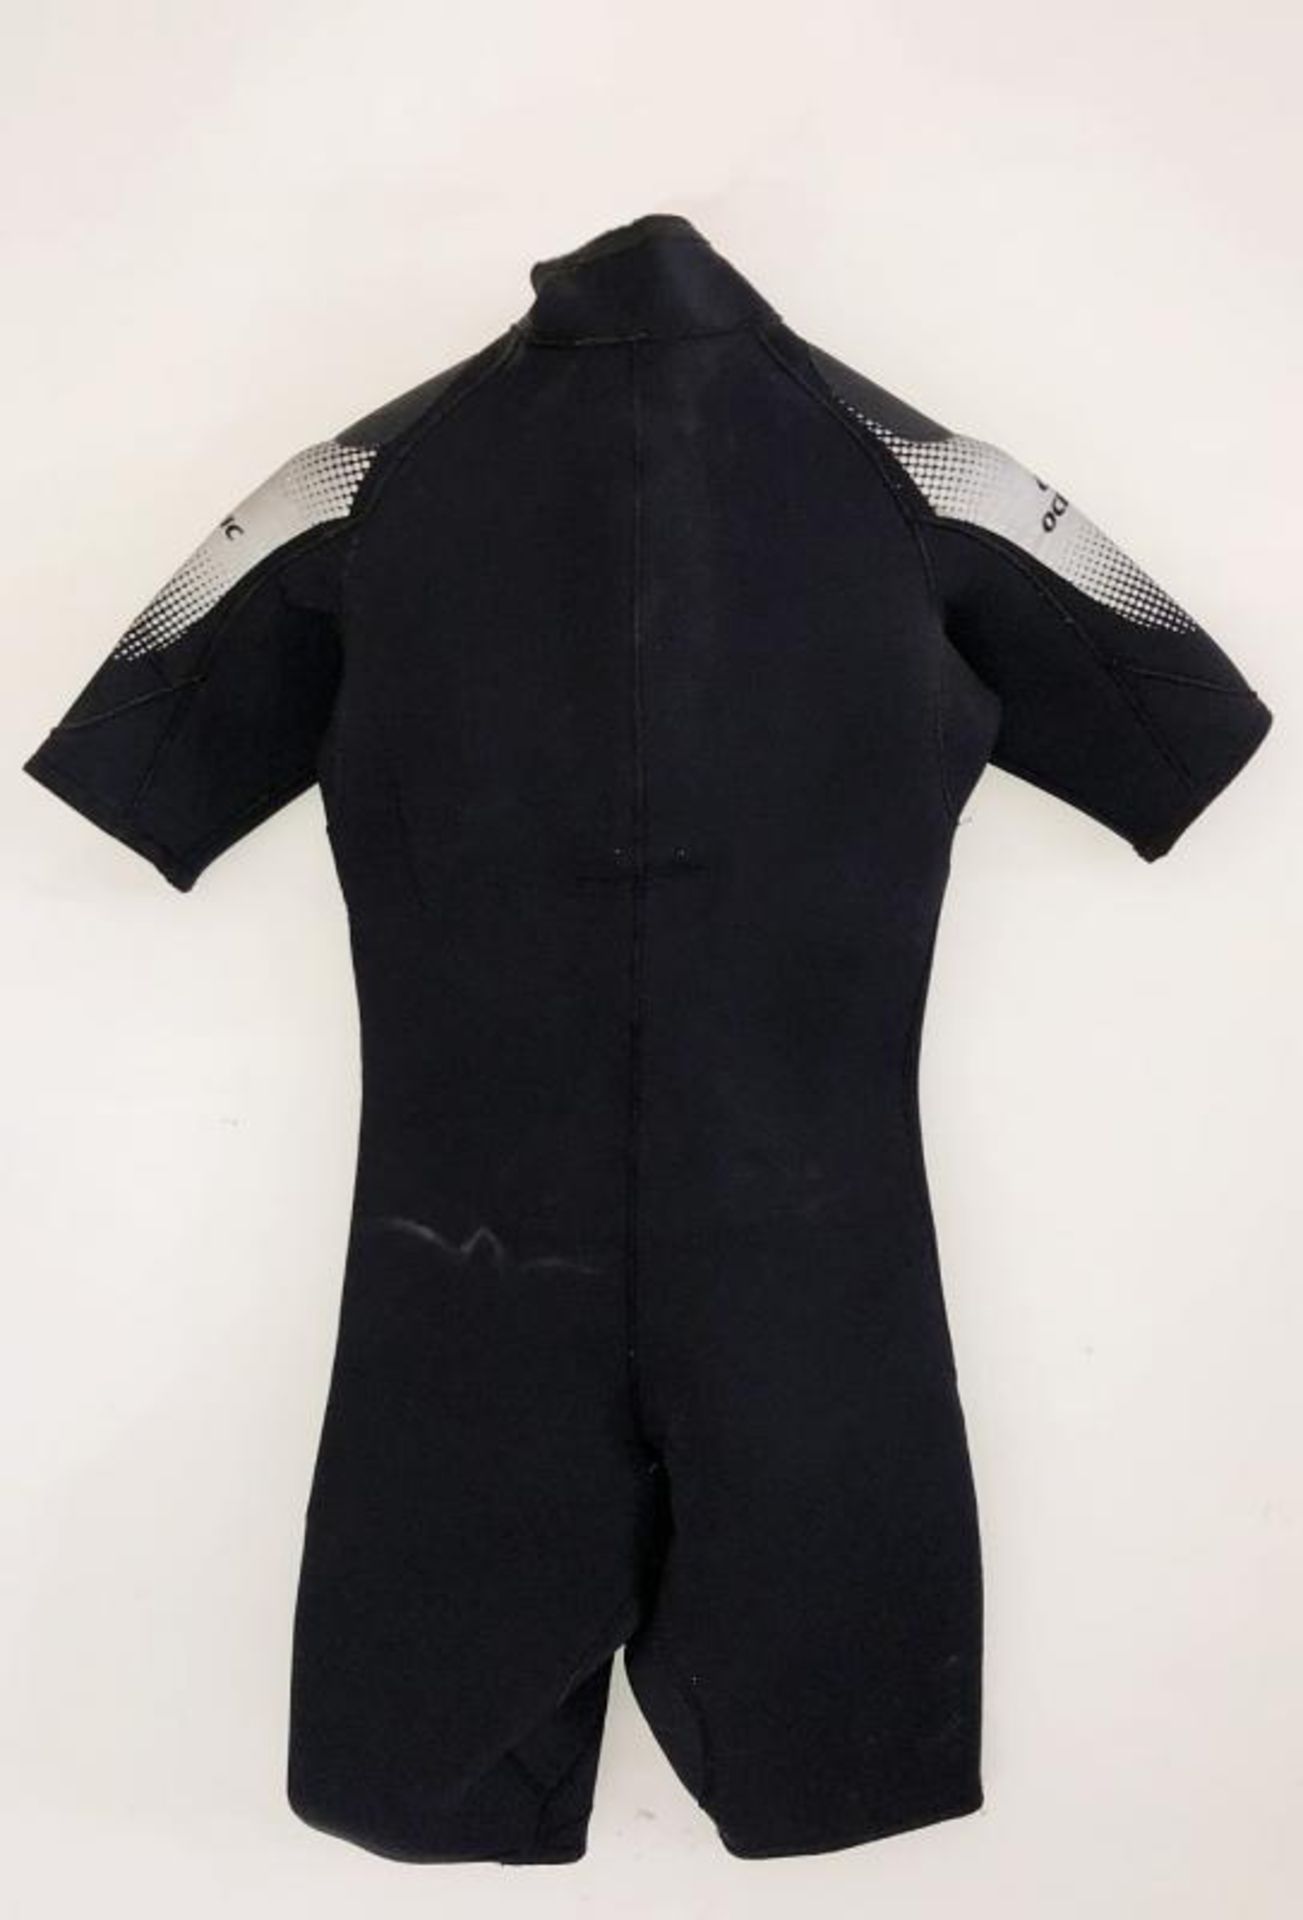 1 x Small Oceanic Shadow Titanium Shortie Wetsuit In Black - Ref: NS354 - CL349 - Location: Altrinch - Image 4 of 5